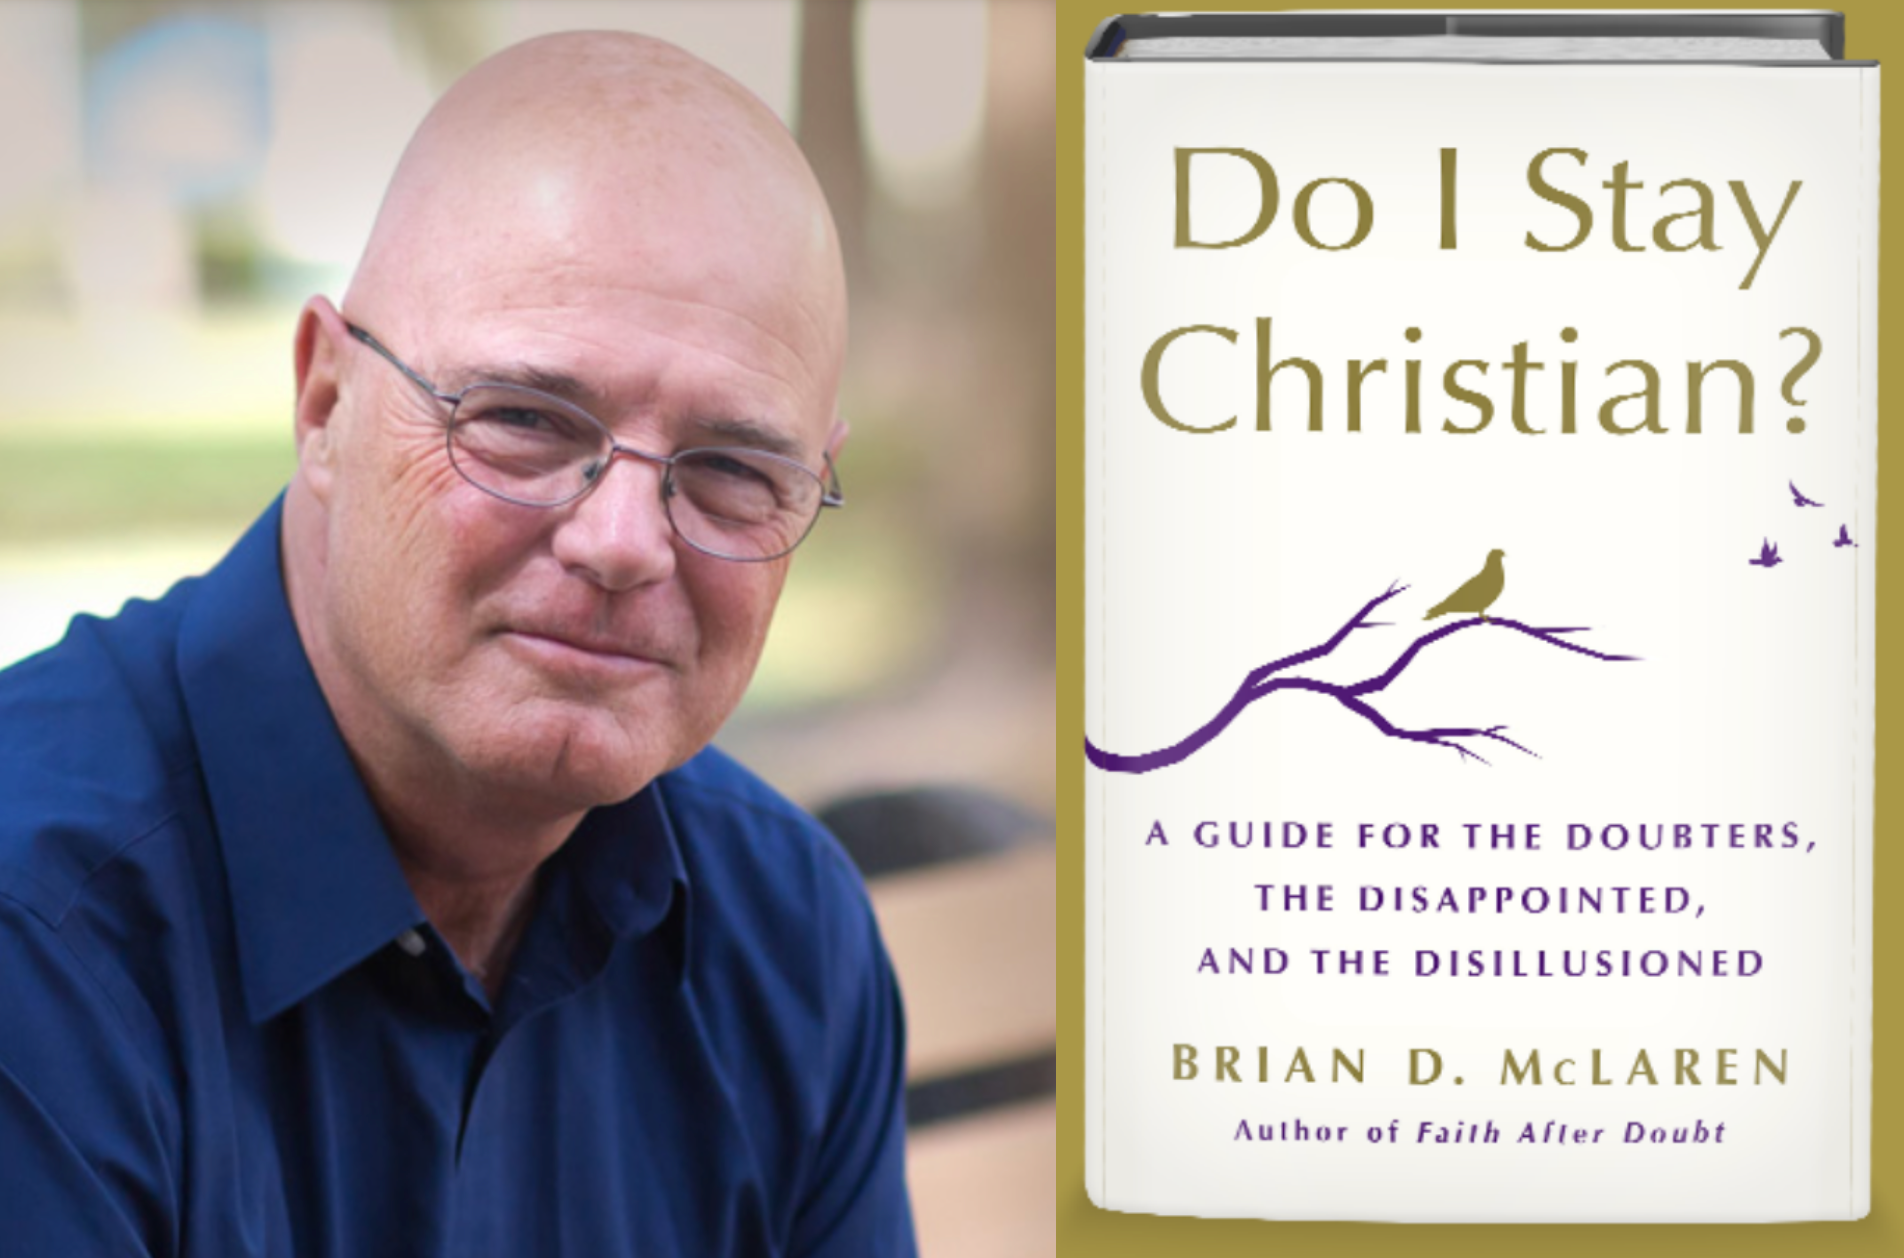 Do I Stay Christian? (with Brian McLaren)